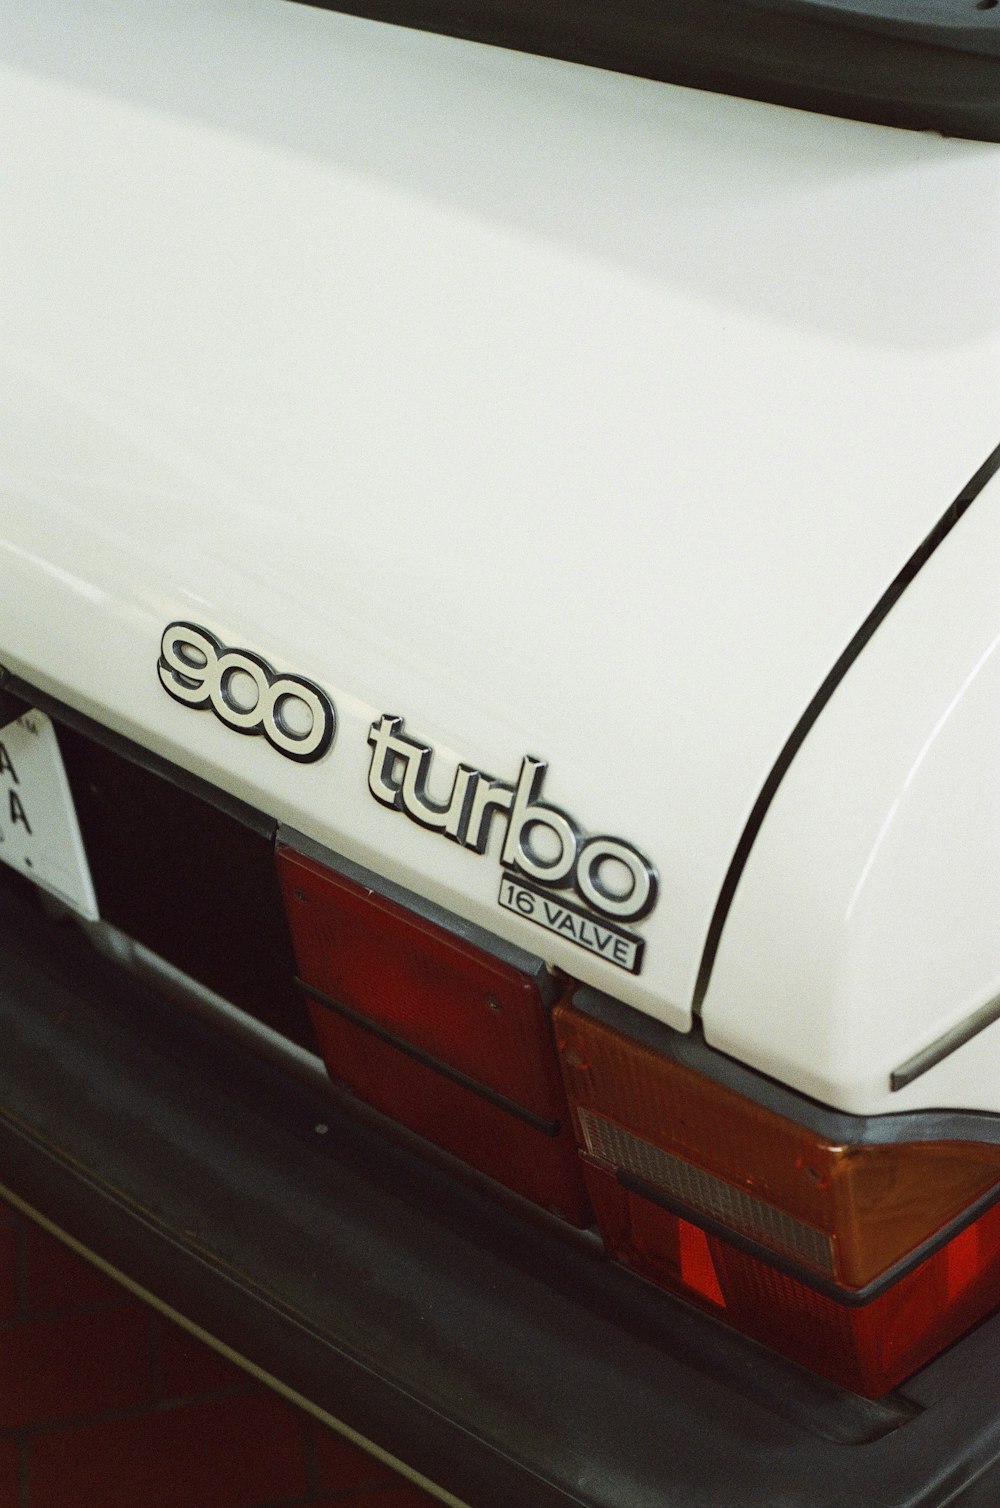 the back end of a white car with the word go turbo on it